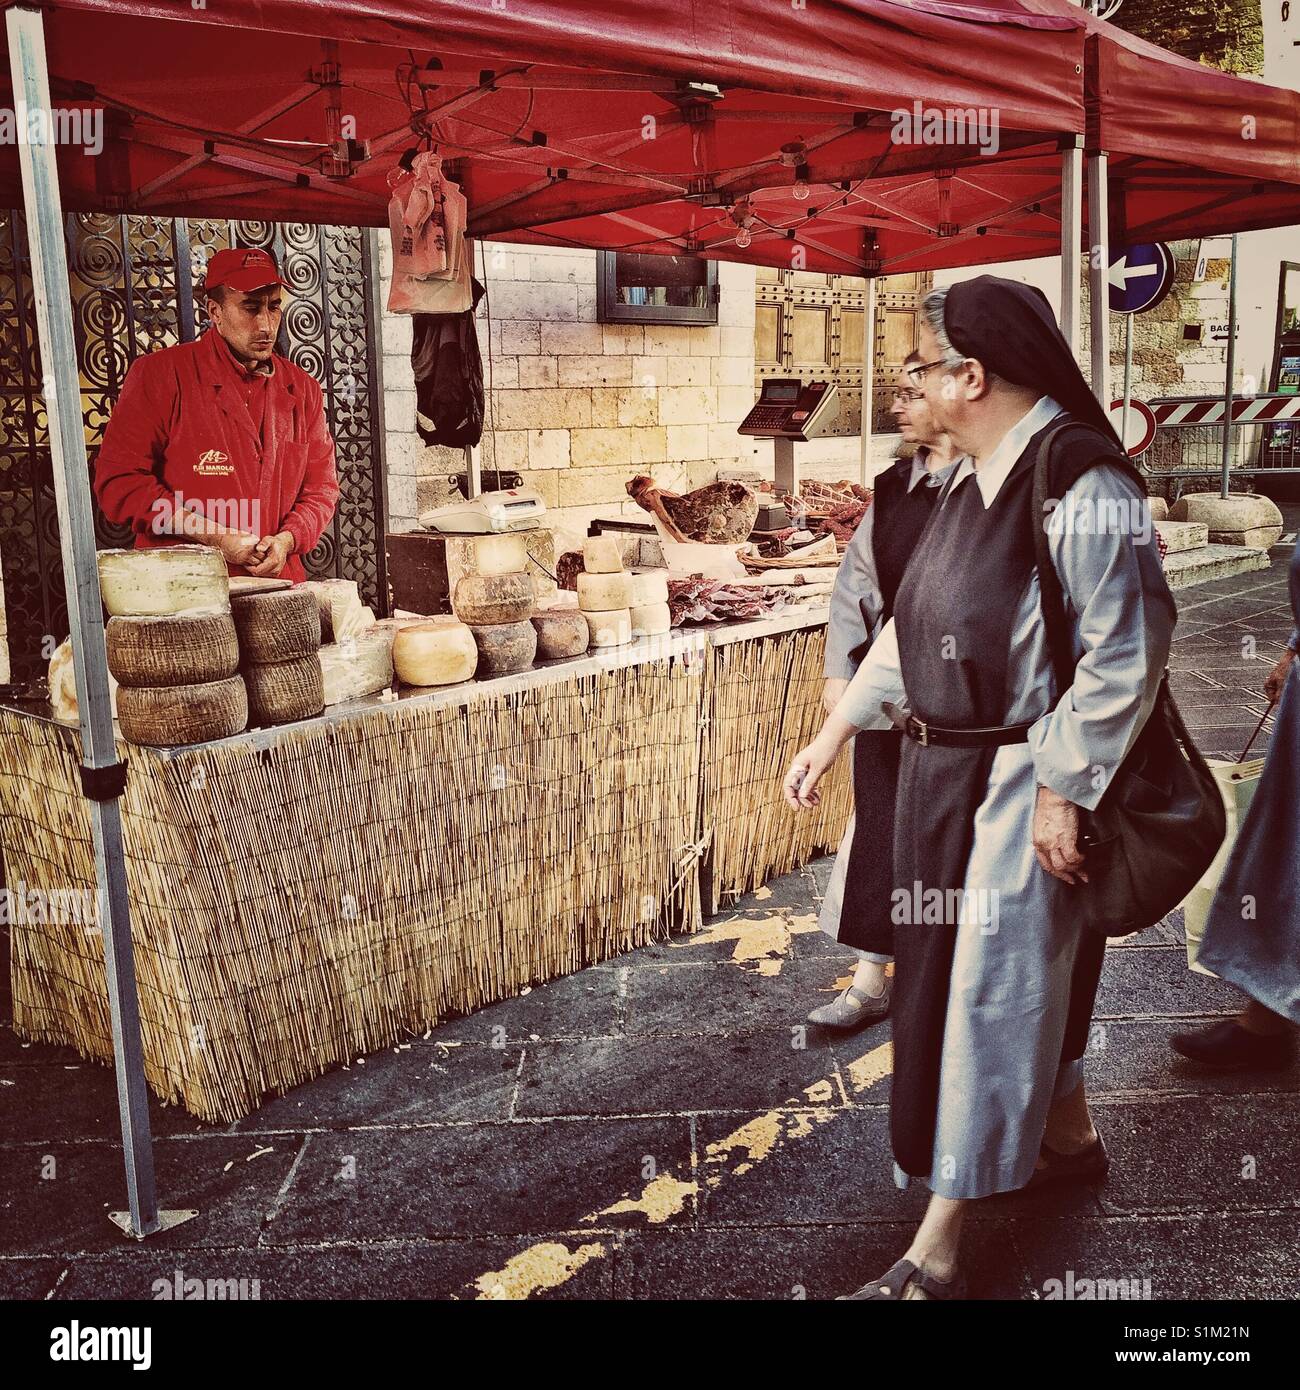 Franciscan nuns eyeing the cheese at the market in Assisi, Italy. Stock Photo